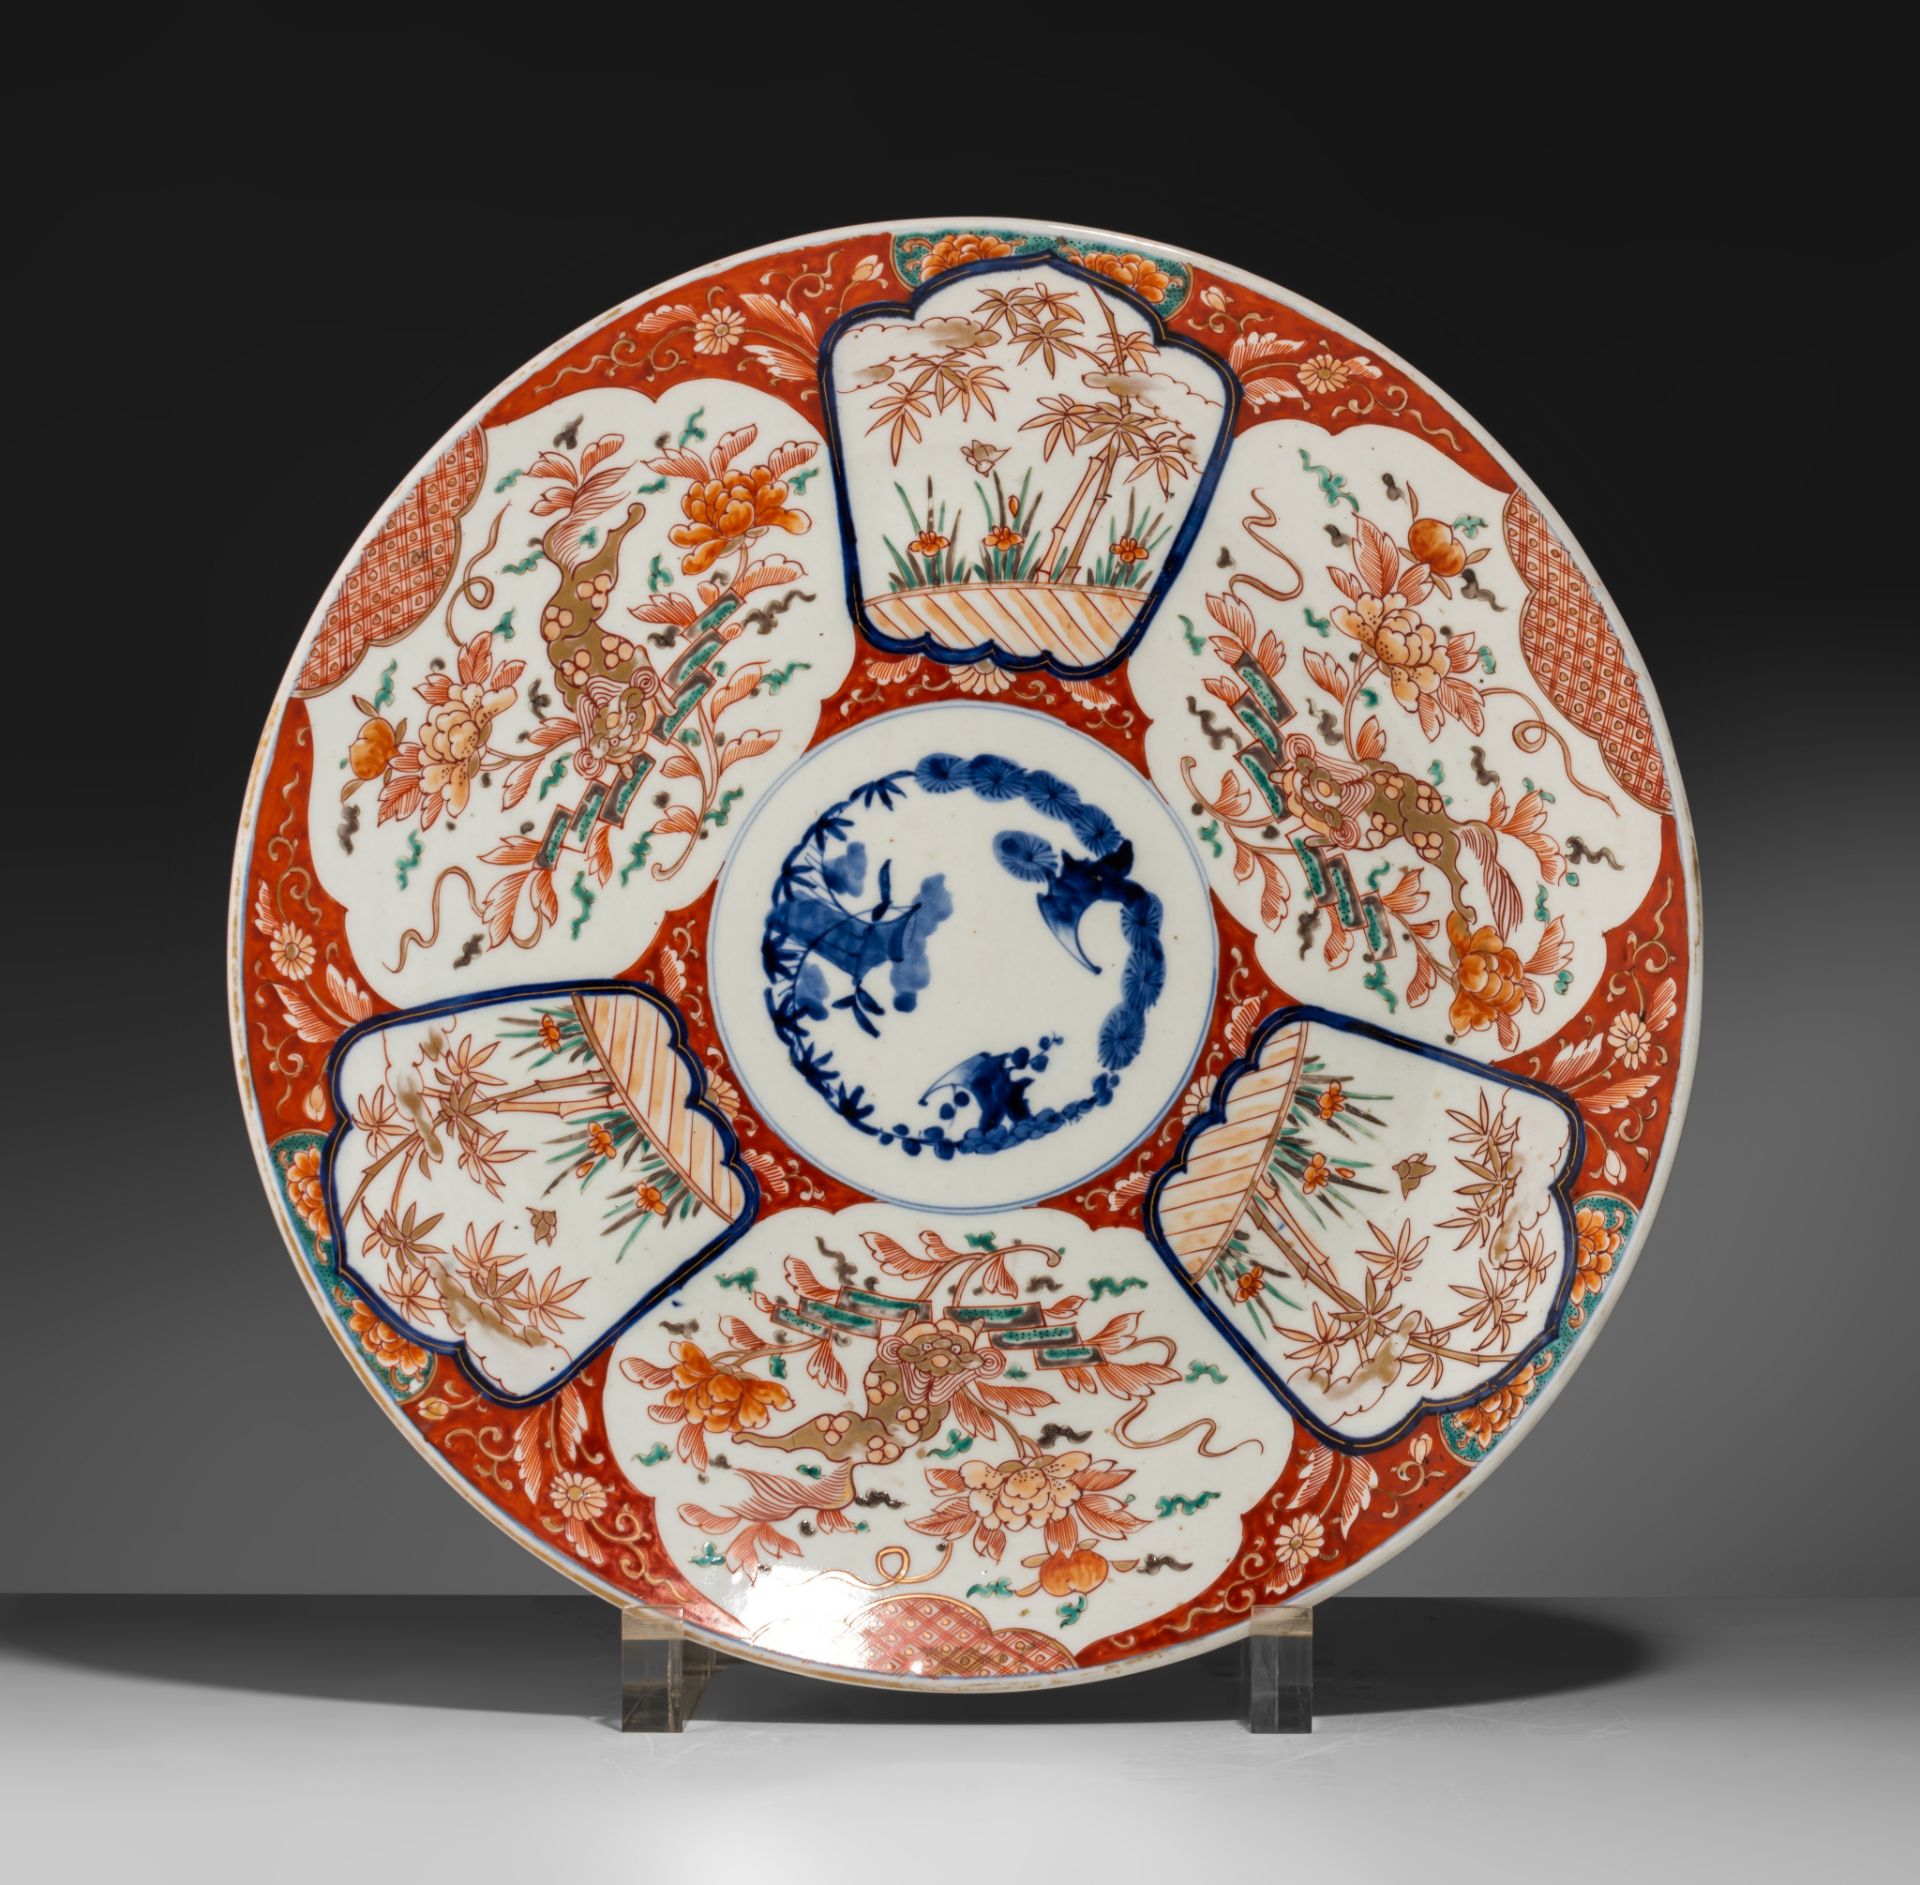 A Japanese Imari charger and a 'Rolled' plate, late 19thC, ø 47,5 (charger) - 22,5 x 18 cm (plate) - Image 2 of 5